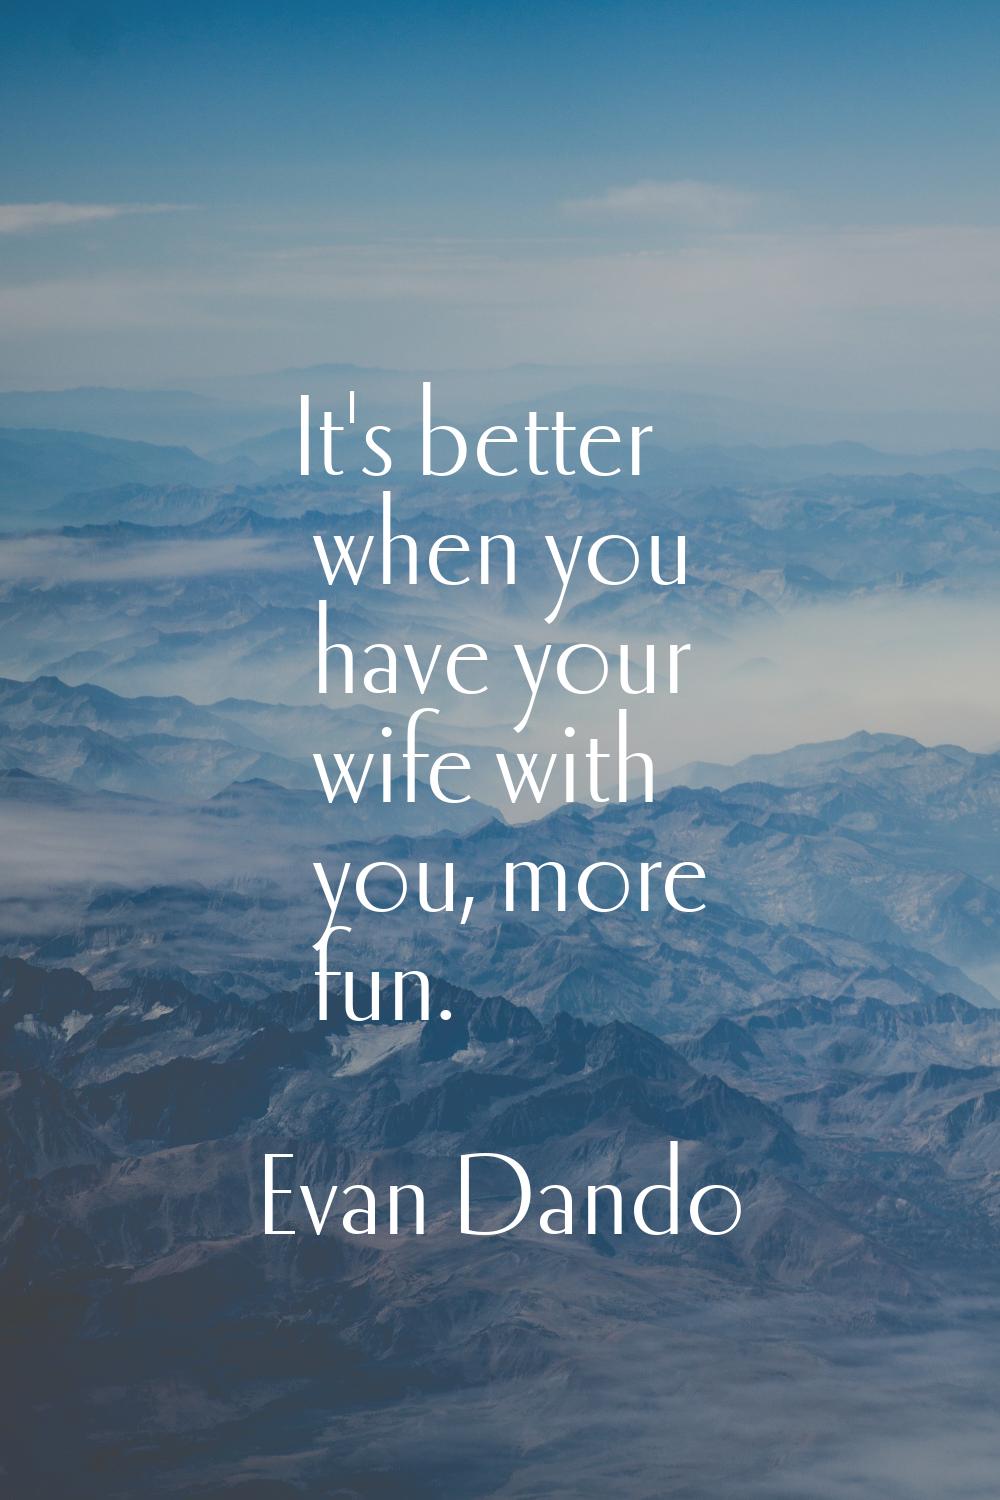 It's better when you have your wife with you, more fun.